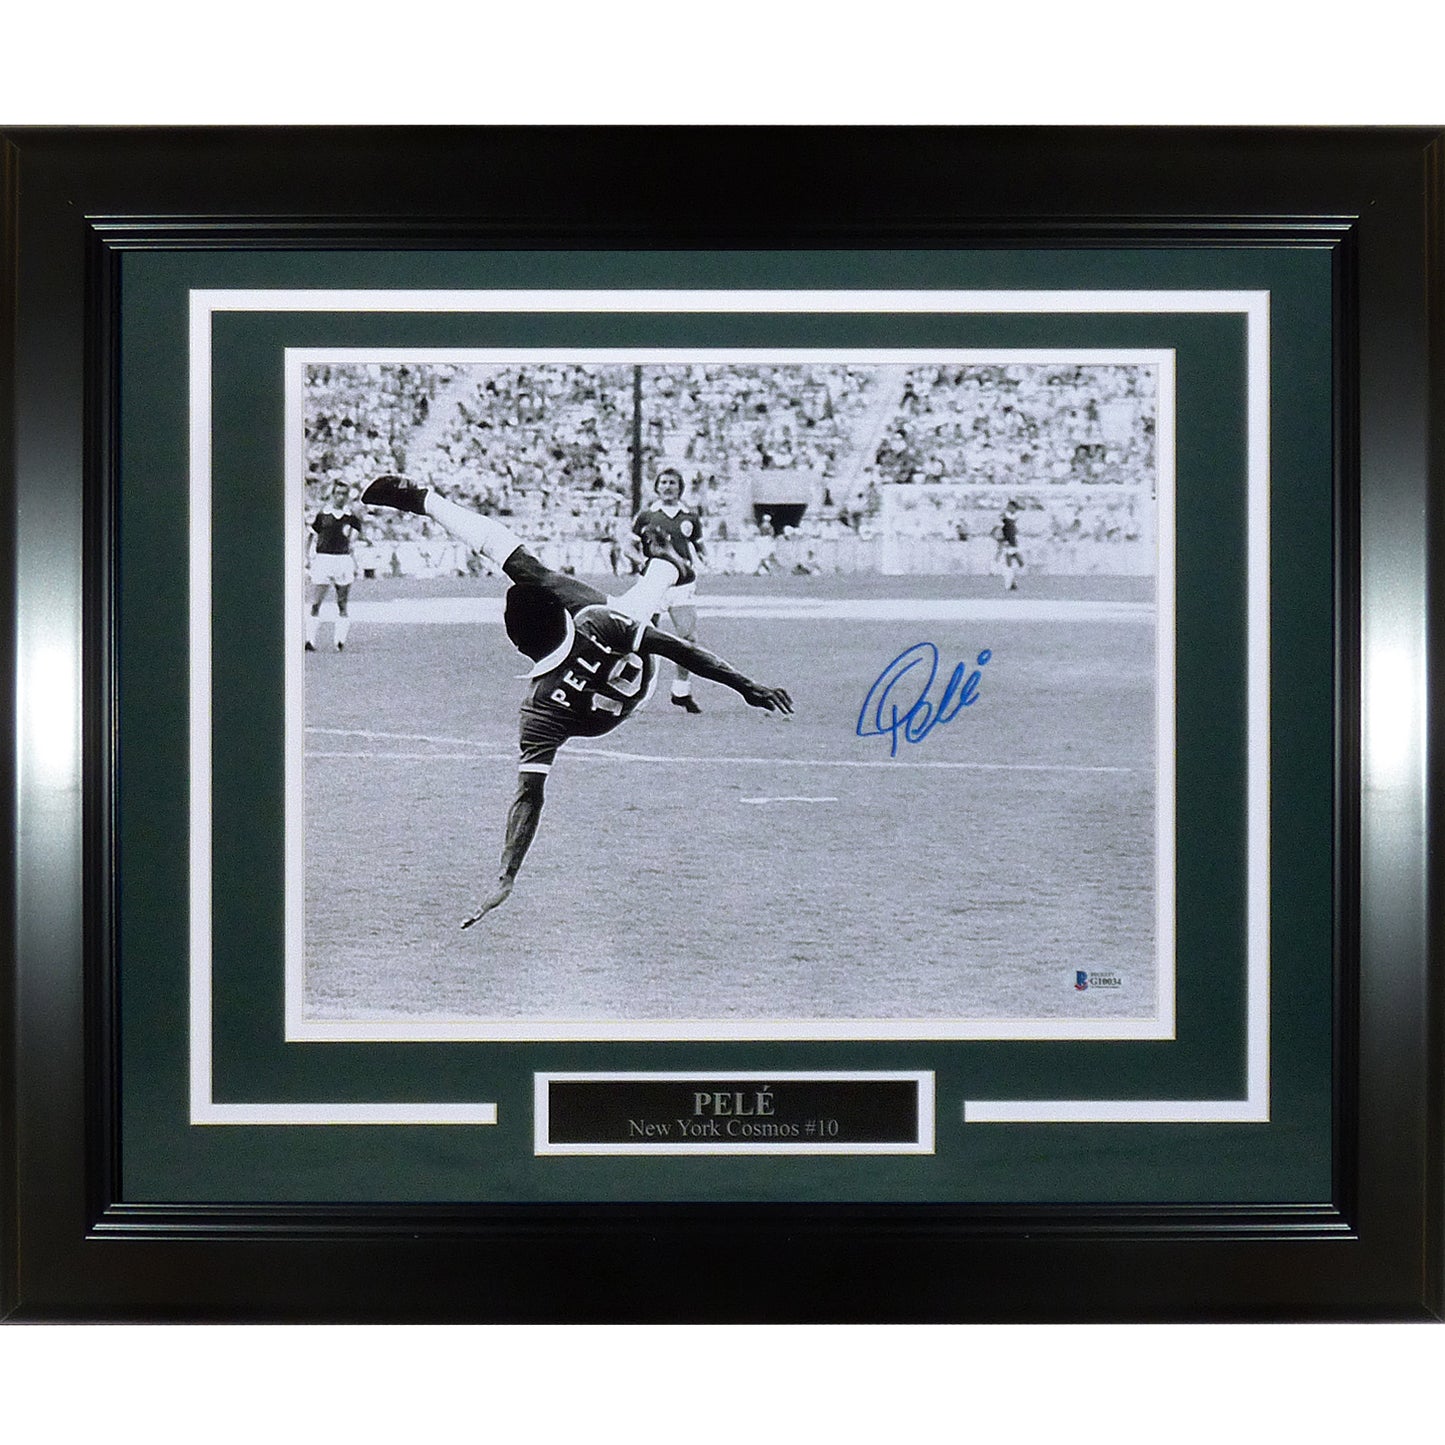 Pele Autographed New York Cosmos Soccer (Bicycle Kick) Deluxe Framed 11x14 Photo – Beckett